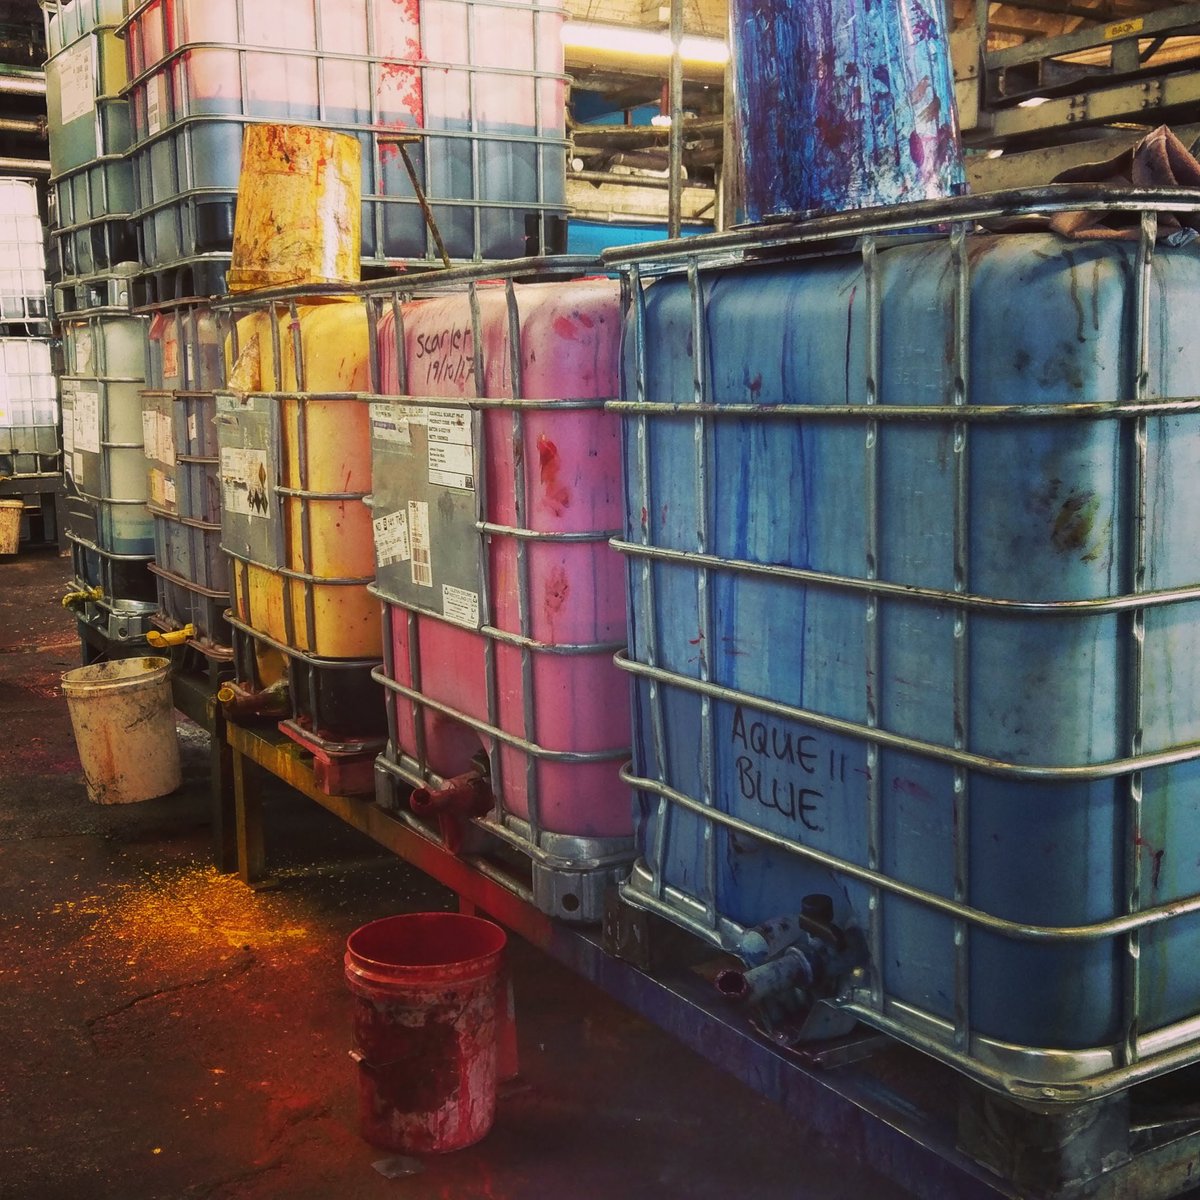 Obviously the #printgeek in us was was excited to see the CMYK-adjacent colouring for making papers of any hue at the @JamesCropper #papermill. #paperproduction #passionforpaper #CMYK #colour #JamesCropperMonday